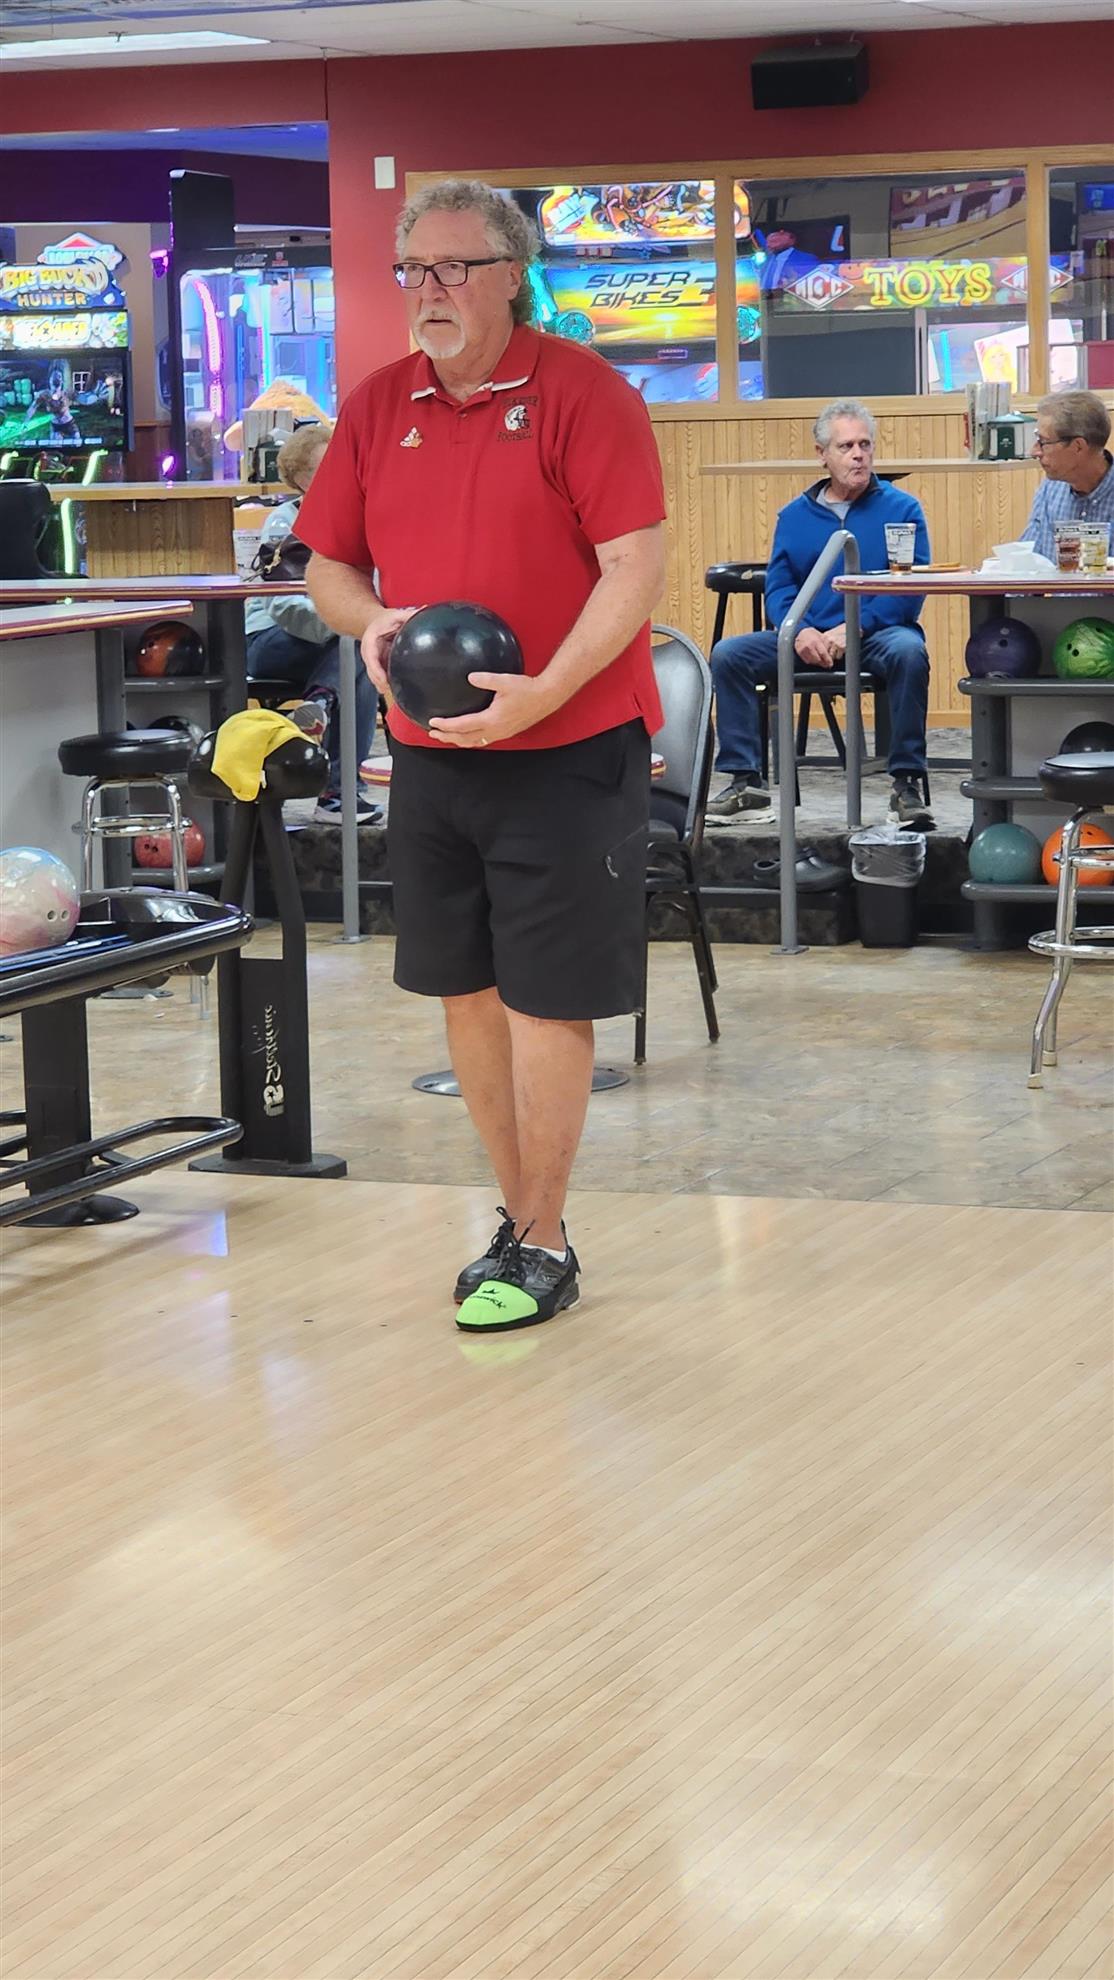 John Osterman preparing to deliver another strike.